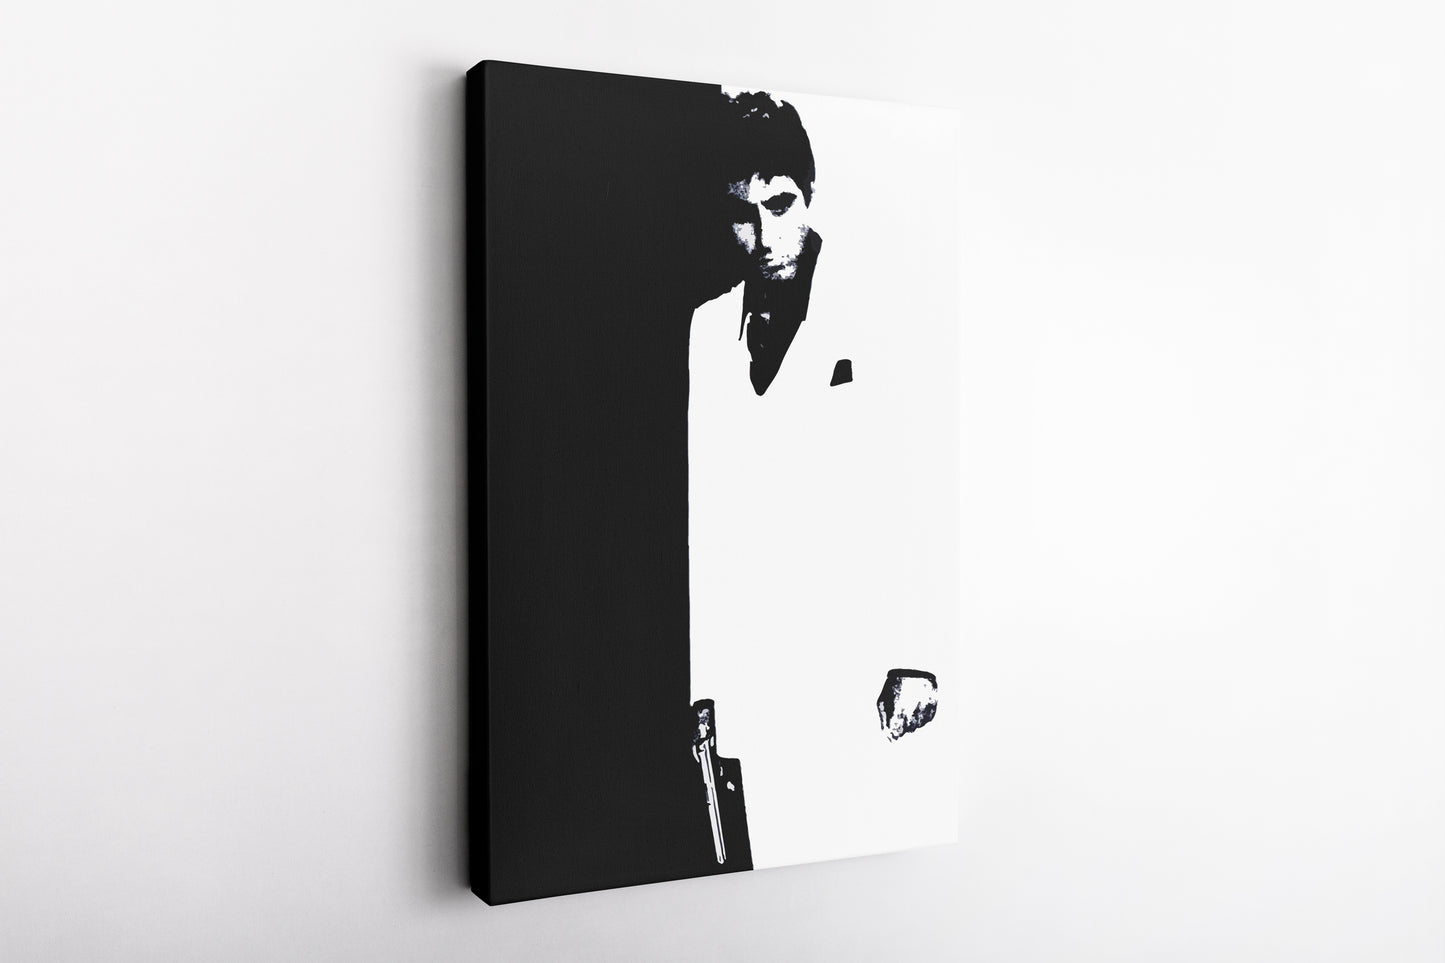 Scarface Poster Al Pacino Black and White Canvas Wall Art Home Decor Framed Art